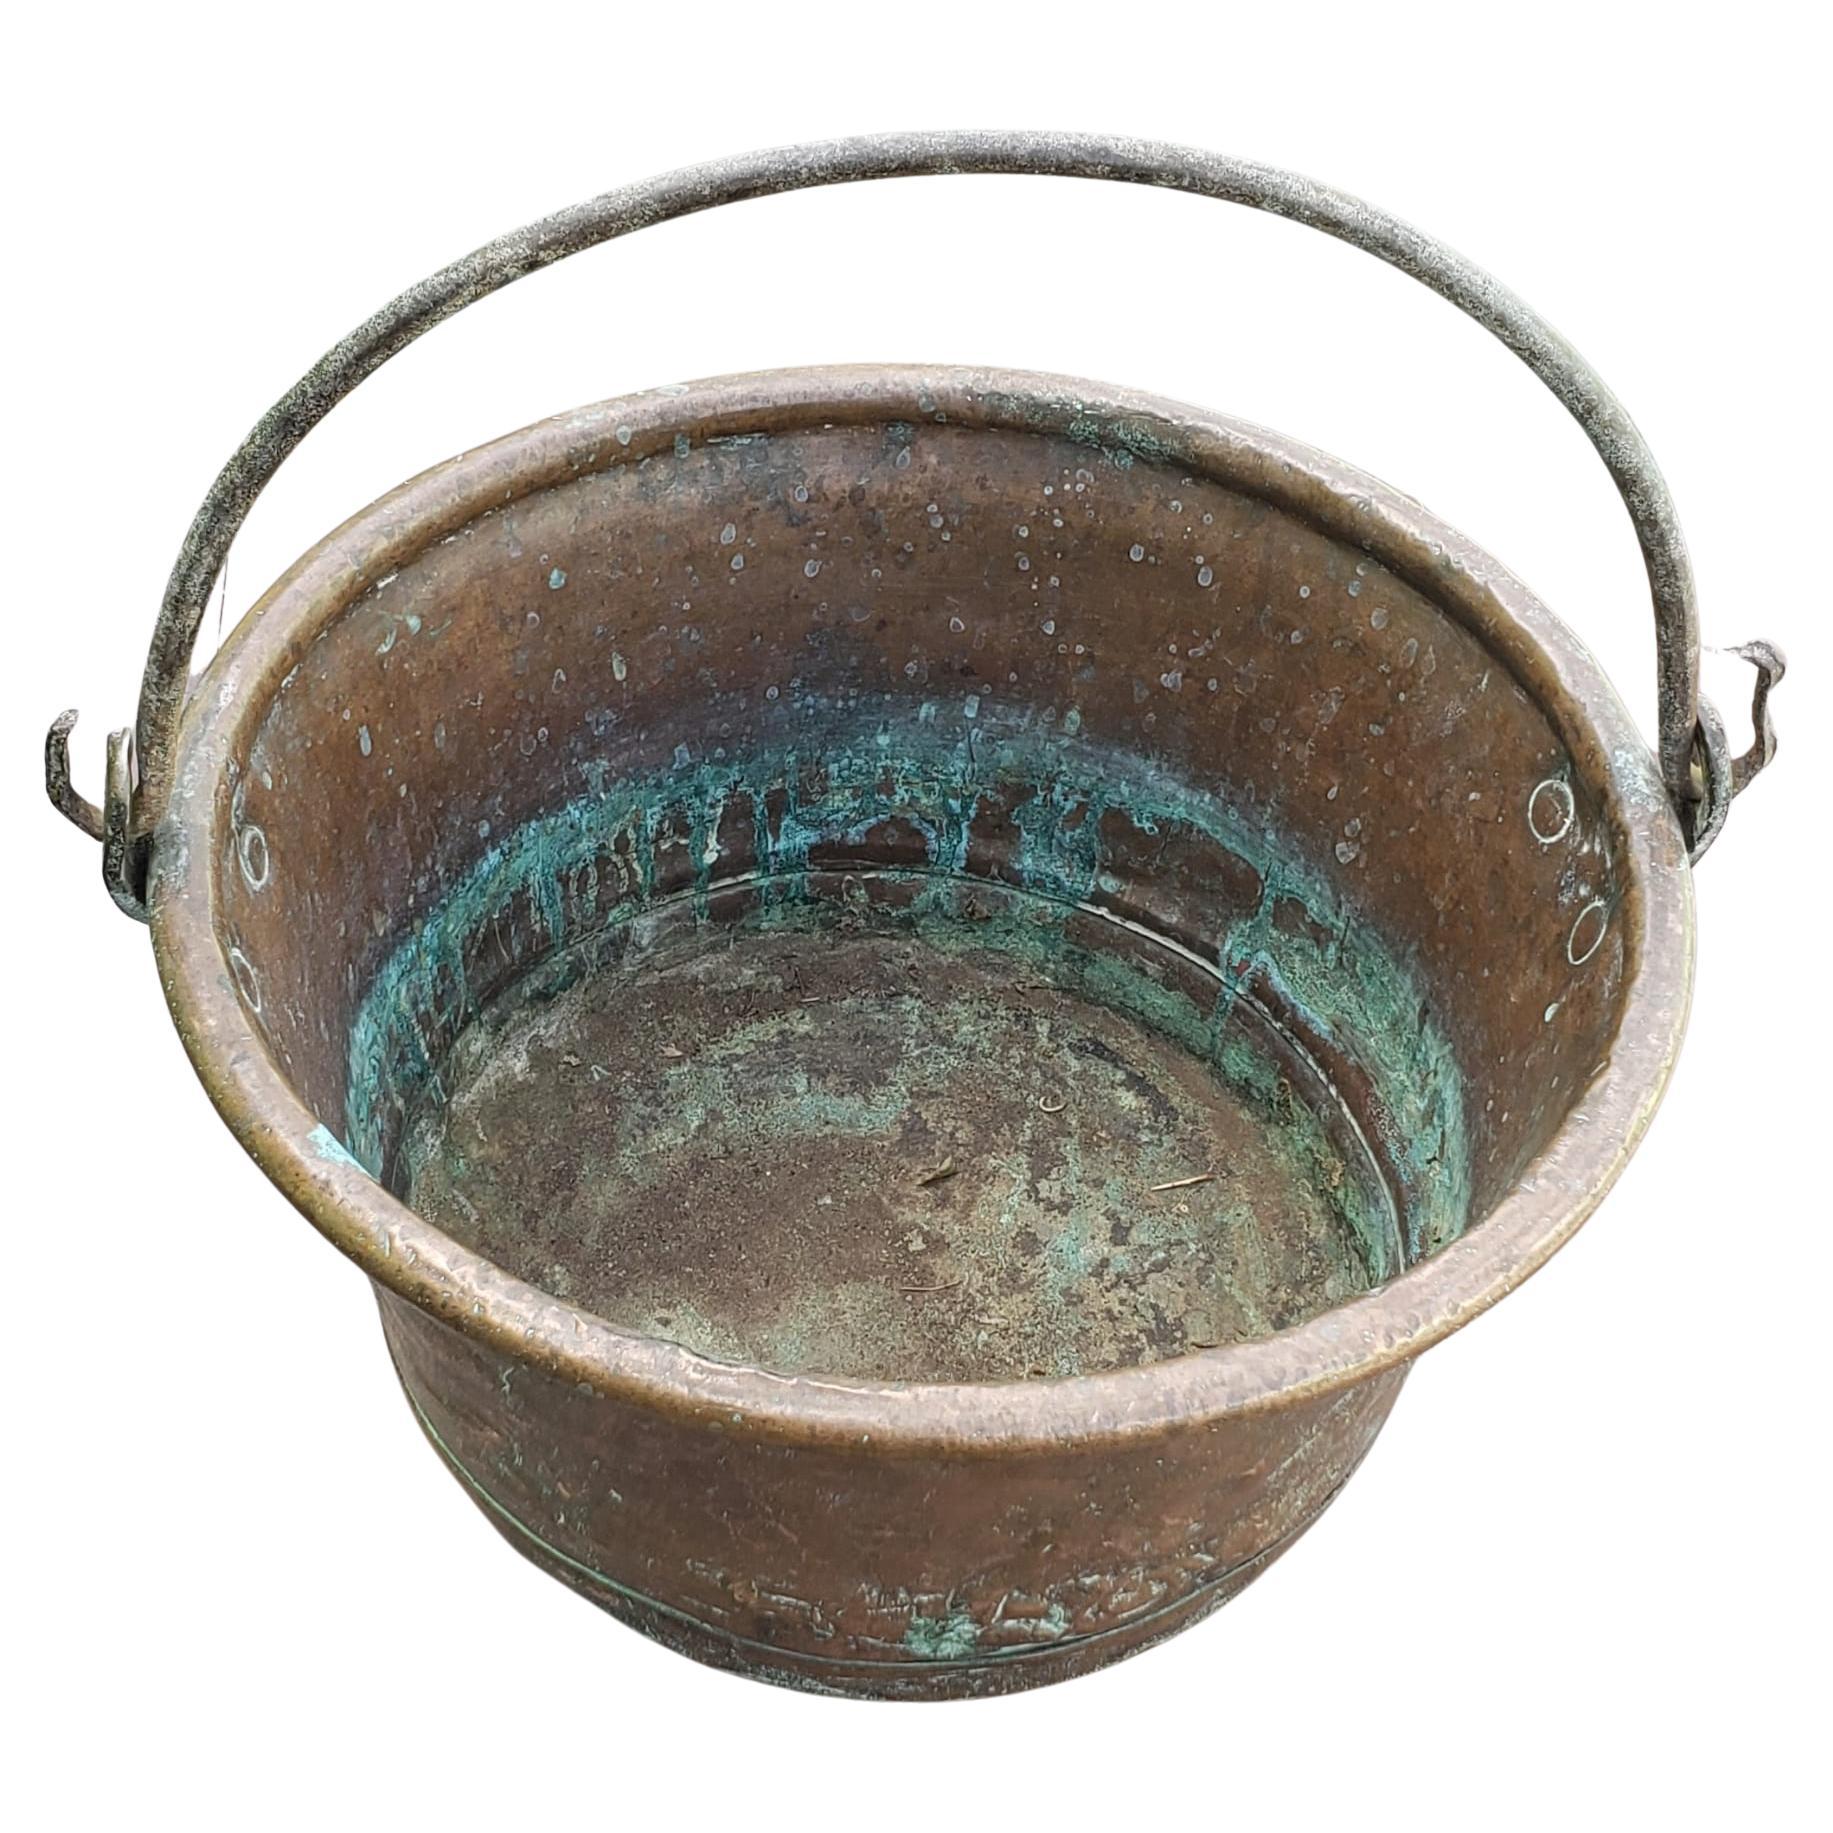 Antique Hand-Hammered Copper Bale with Iron Handle Bucket Jardiniere. 
Measures 15.5